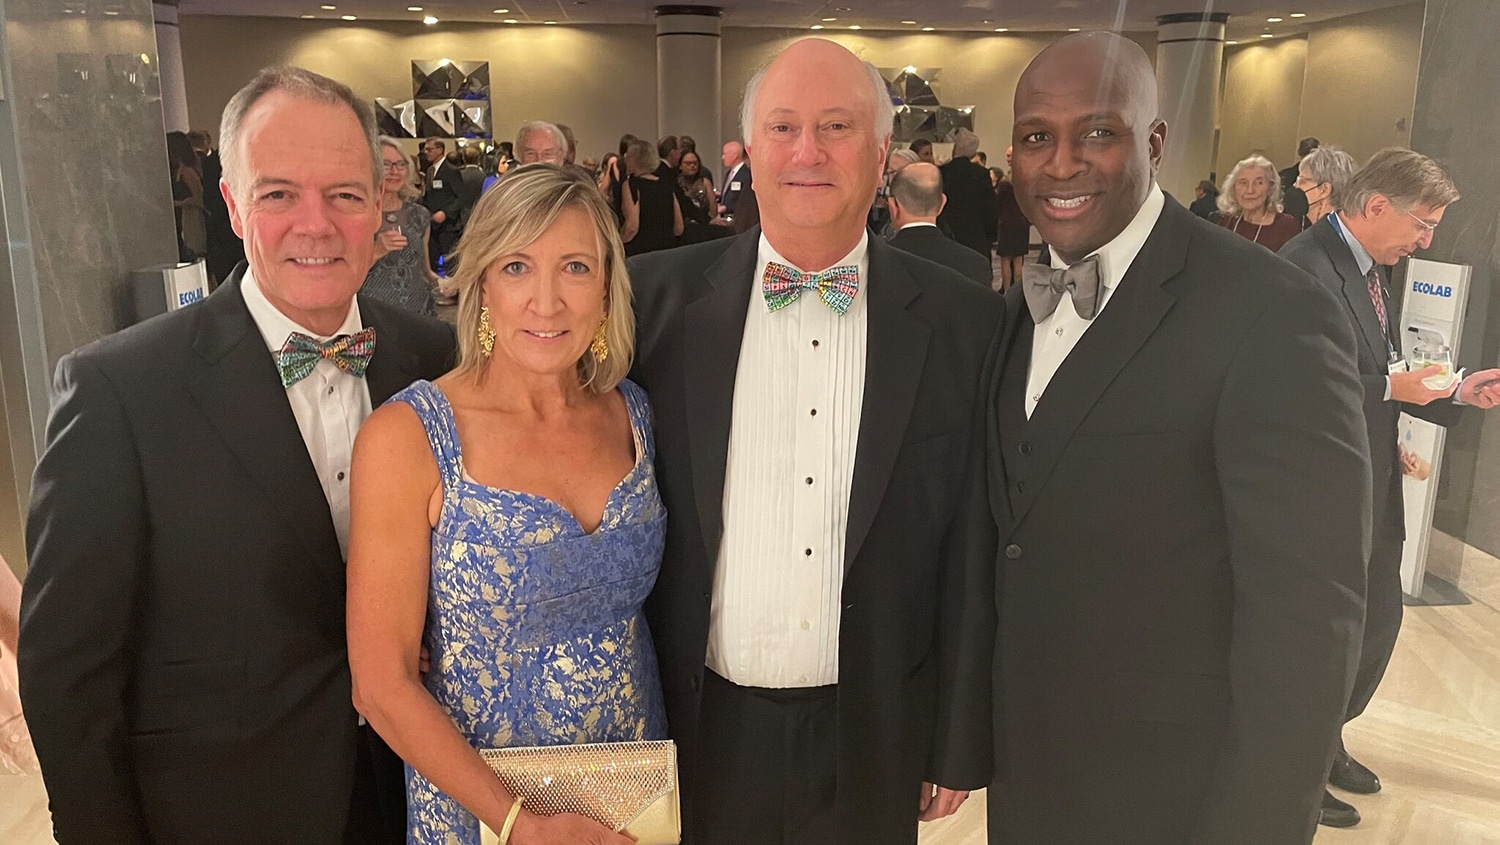 From left, Wolfspeed CEO Gregg Lowe, Nancy and John Palmour, and Wolfspeed board member Marvin Riley at Palmour's induction into the National Academy of Engineering earlier this month.